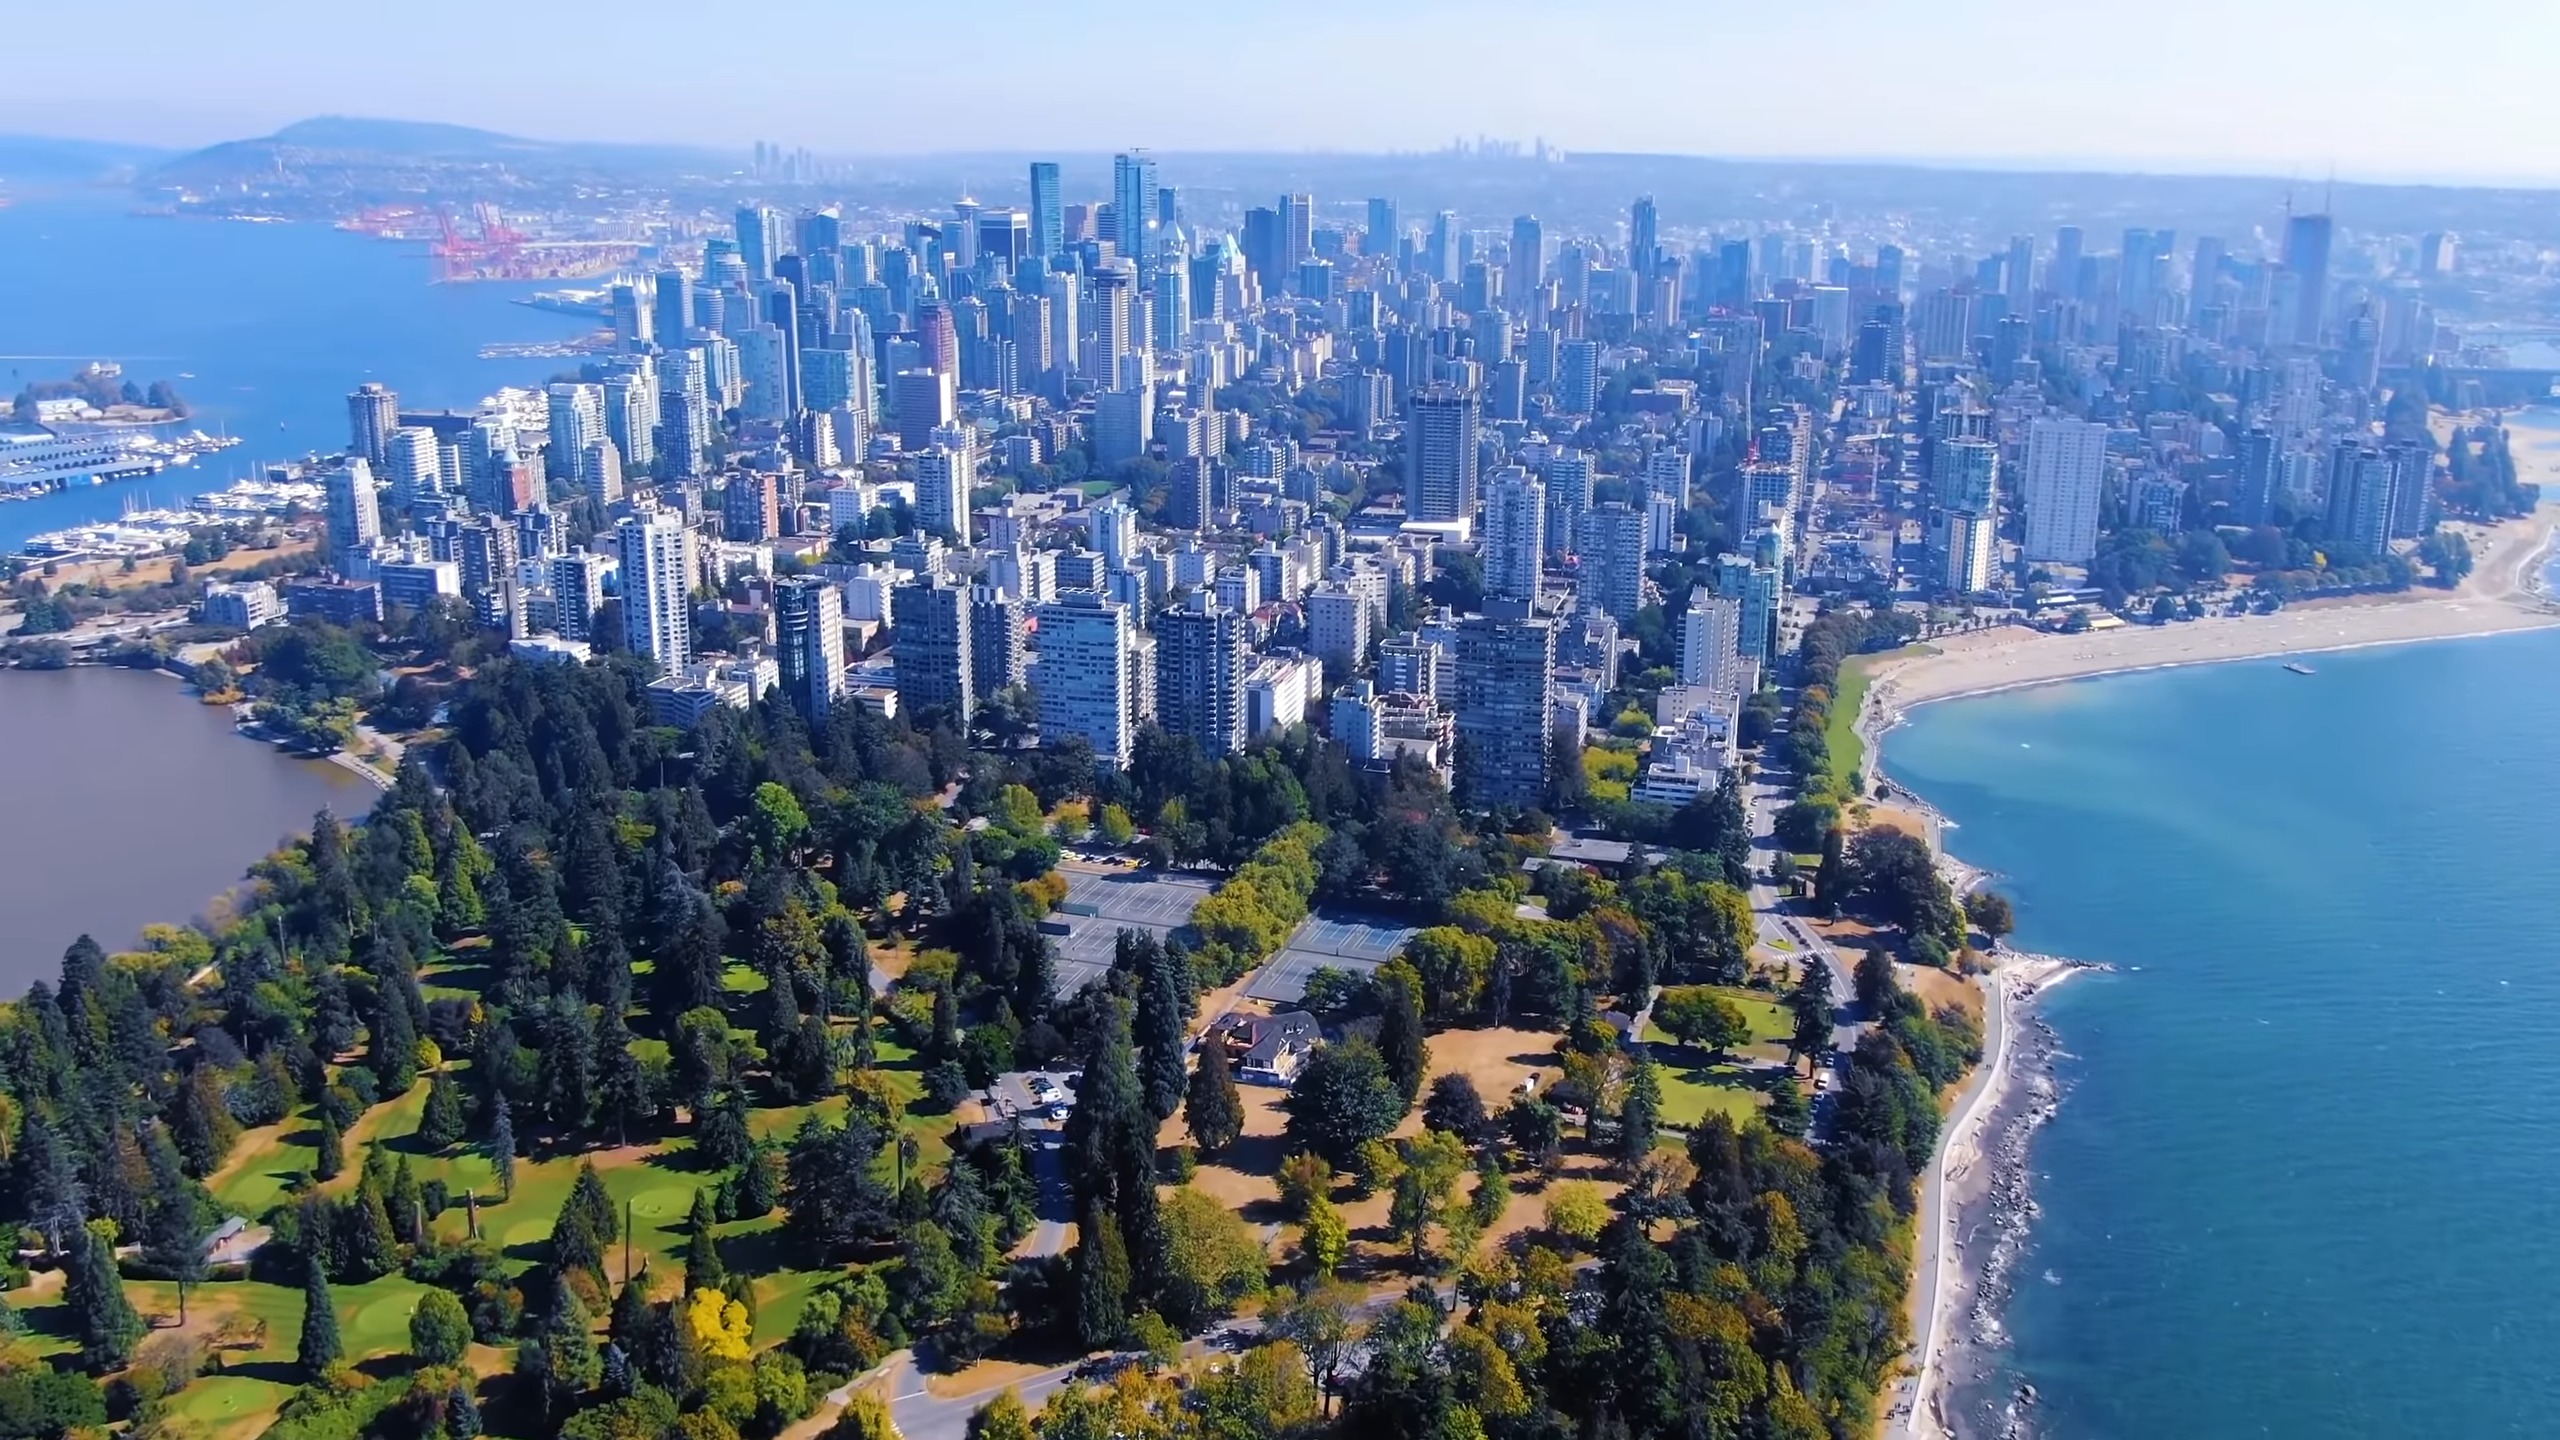 Vancouver- No space for urbanization